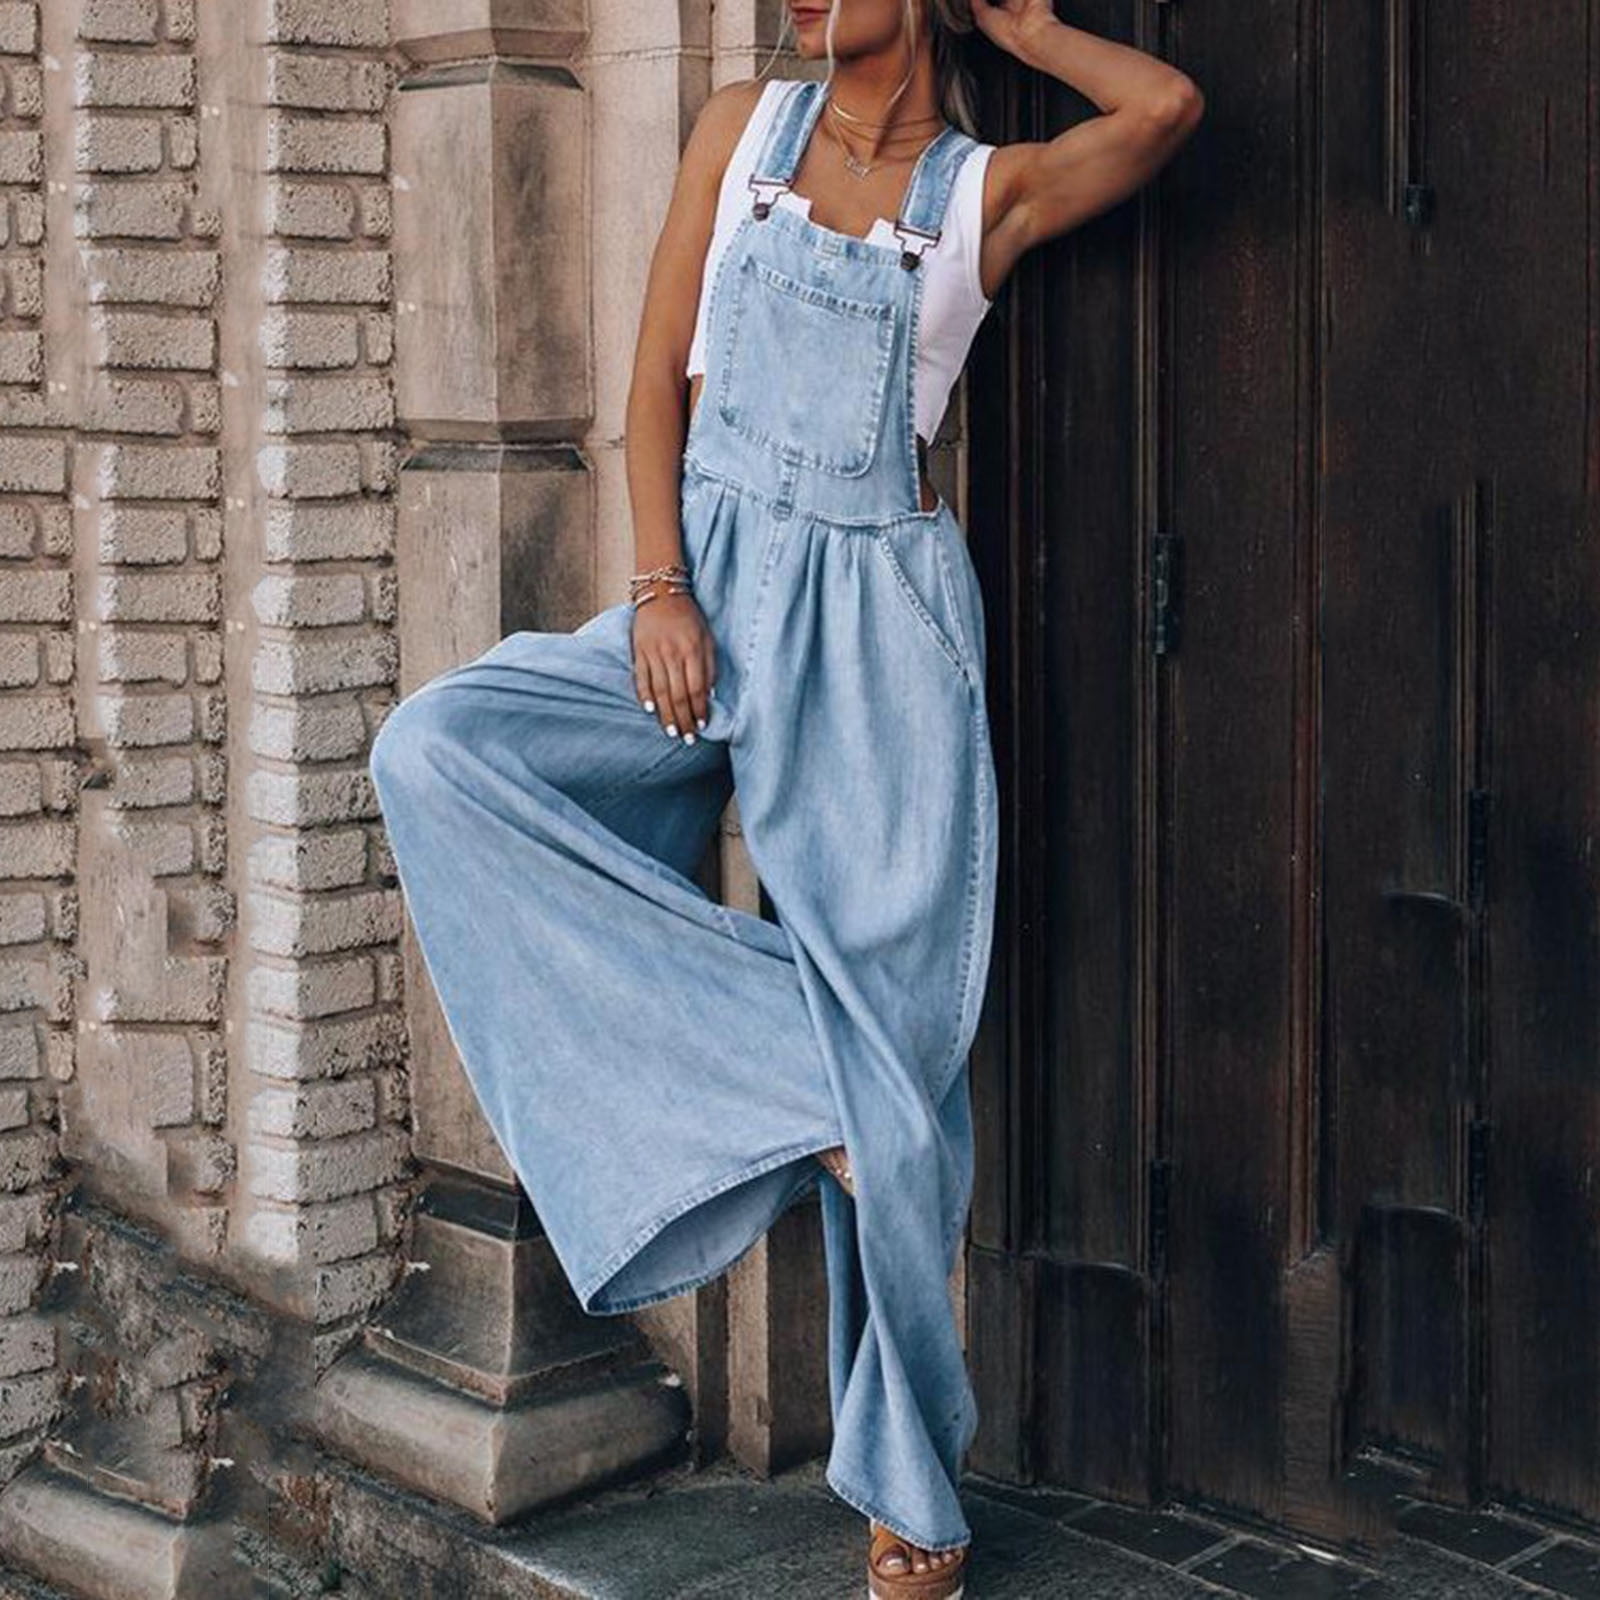 How to Style Denim Dungarees (Overalls) | With a Blue Tee Like a Jumpsuit -  Not Dressed As Lamb